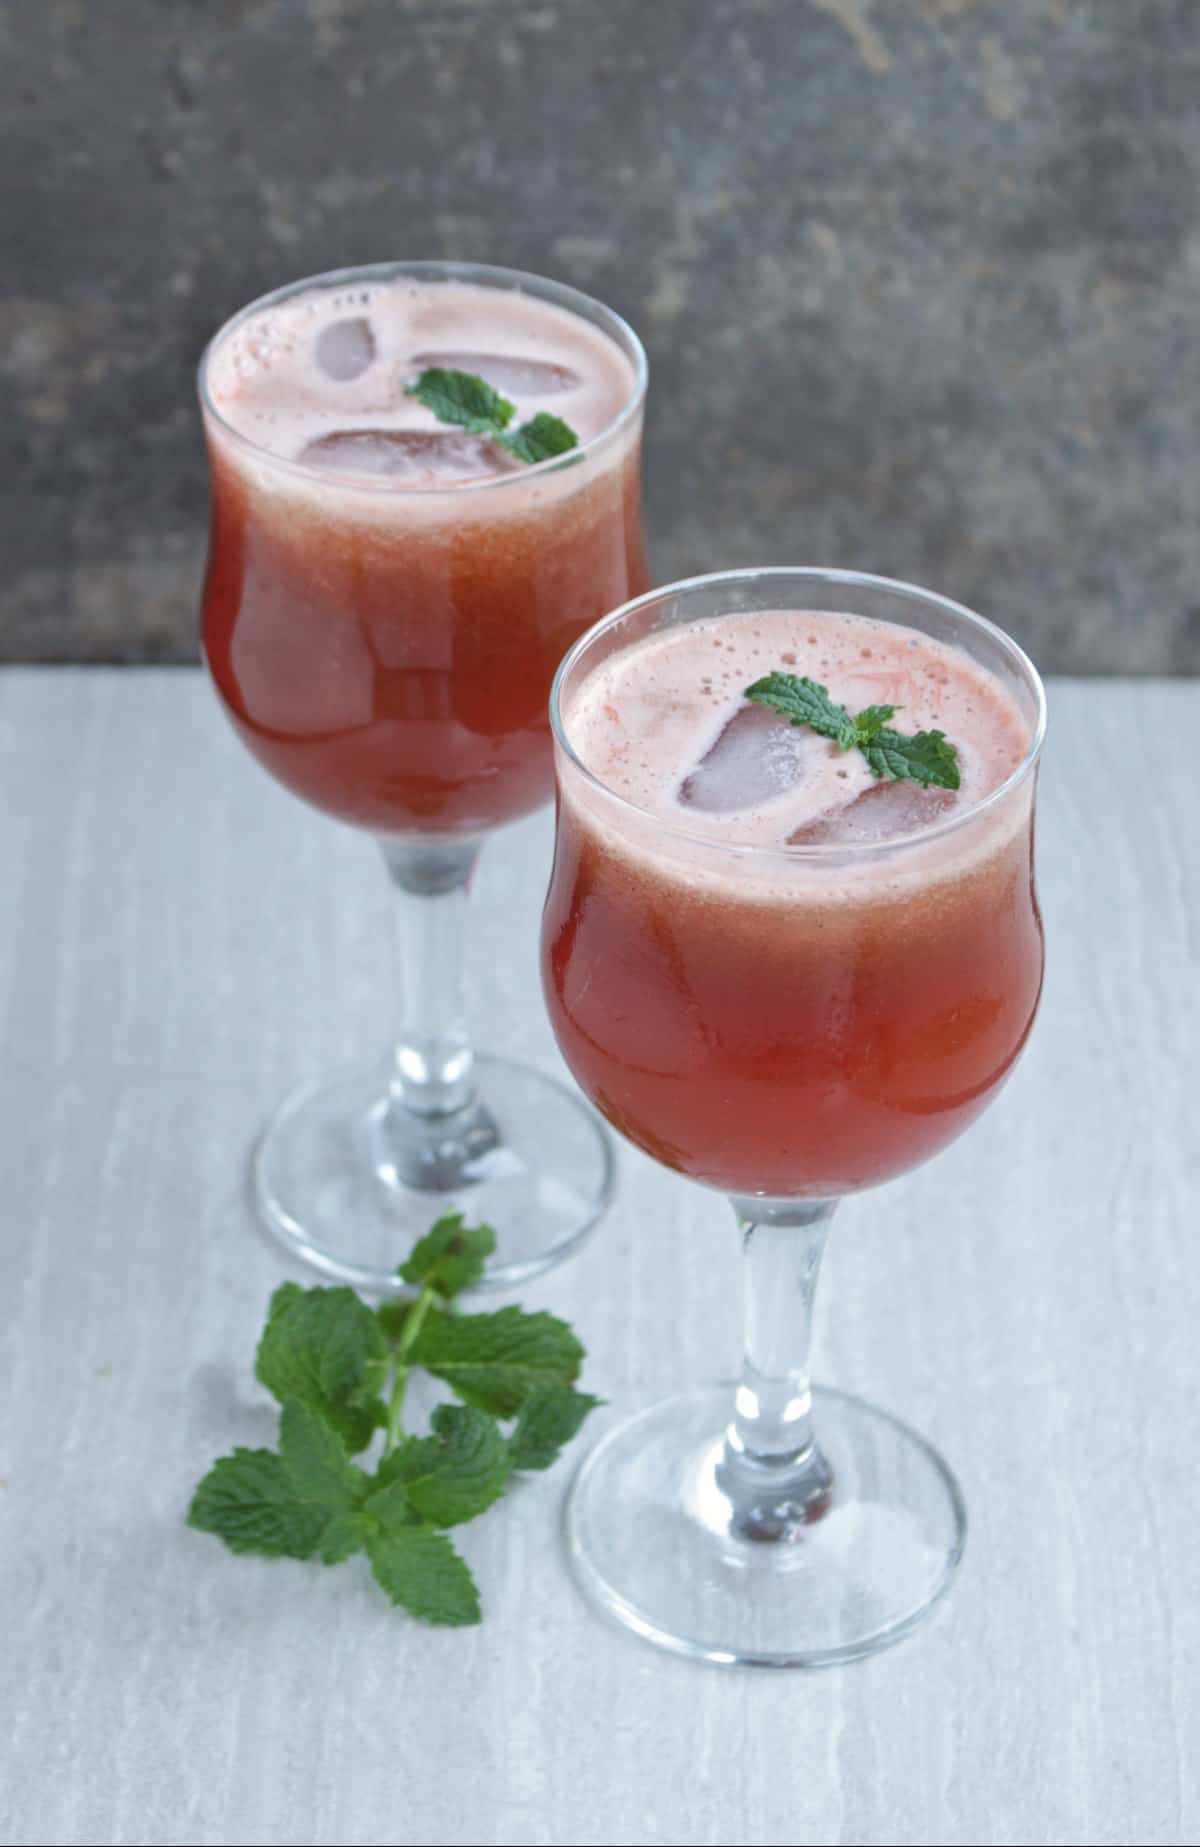 Watermelon juice with mint as garnish in 2 glasses